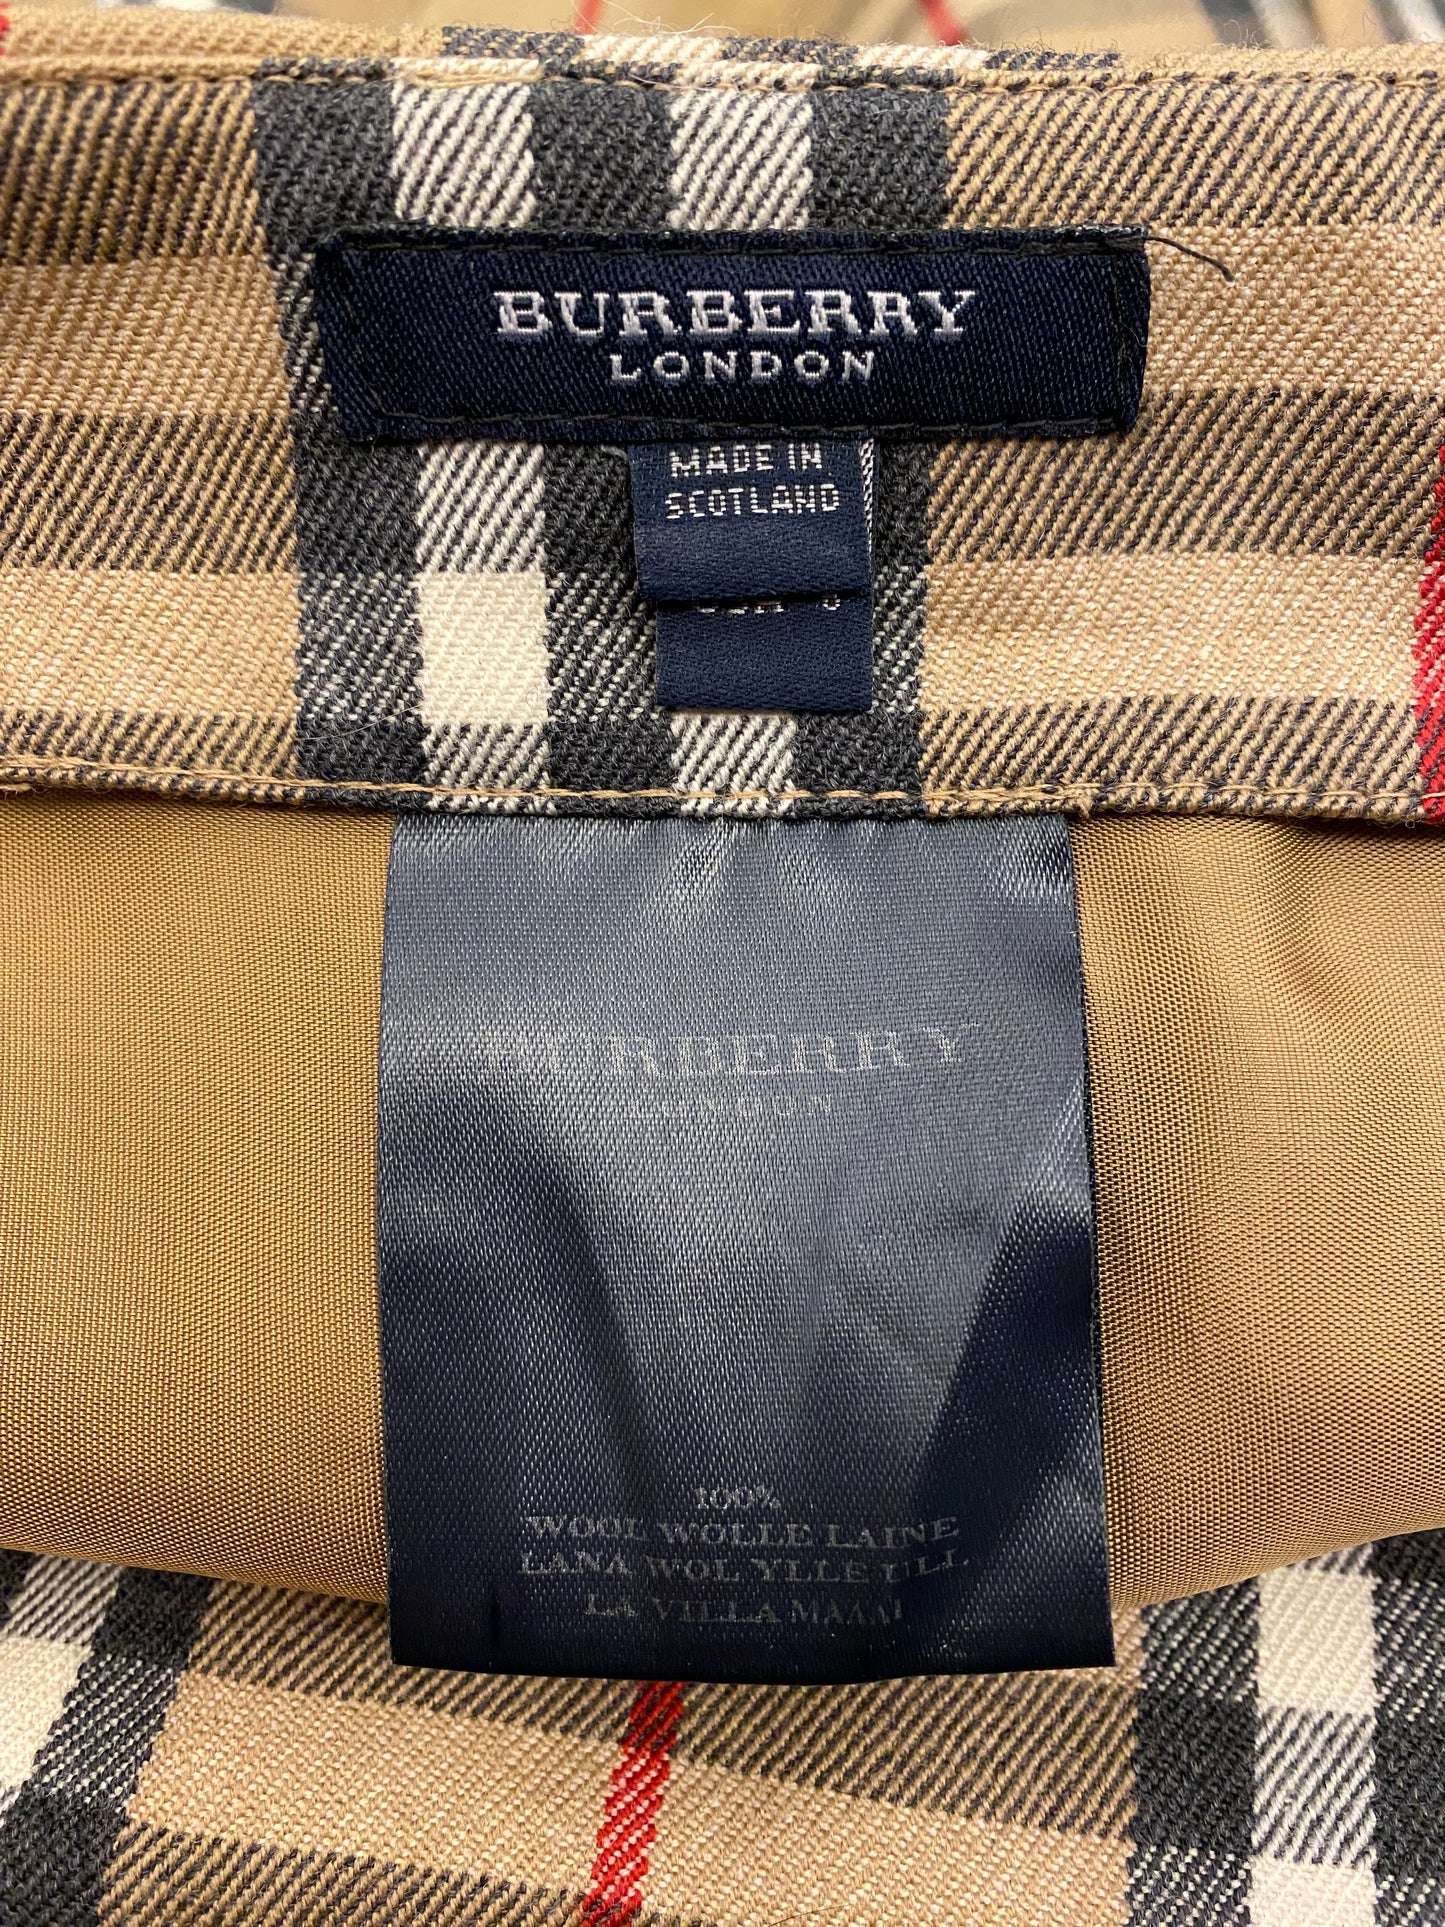 BURBERRY Wool Check Skirt Size 36/38